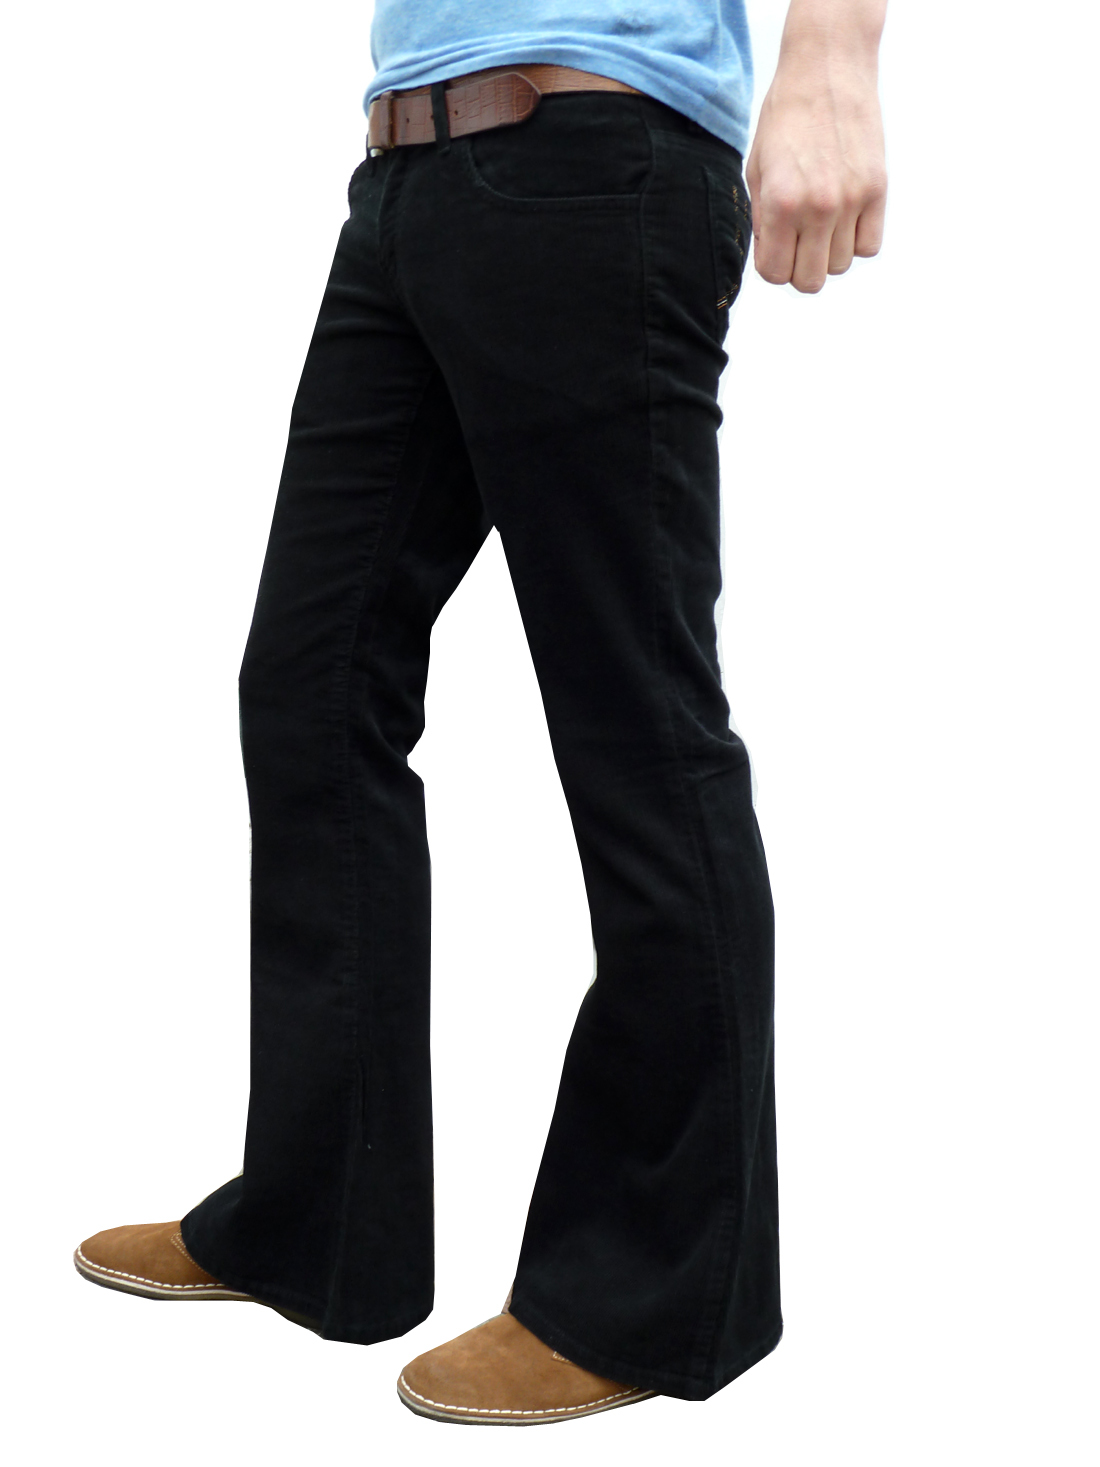 Mens Flares Black Corduroy Flared Bell Bottoms Pants Hippie indie 70s ...